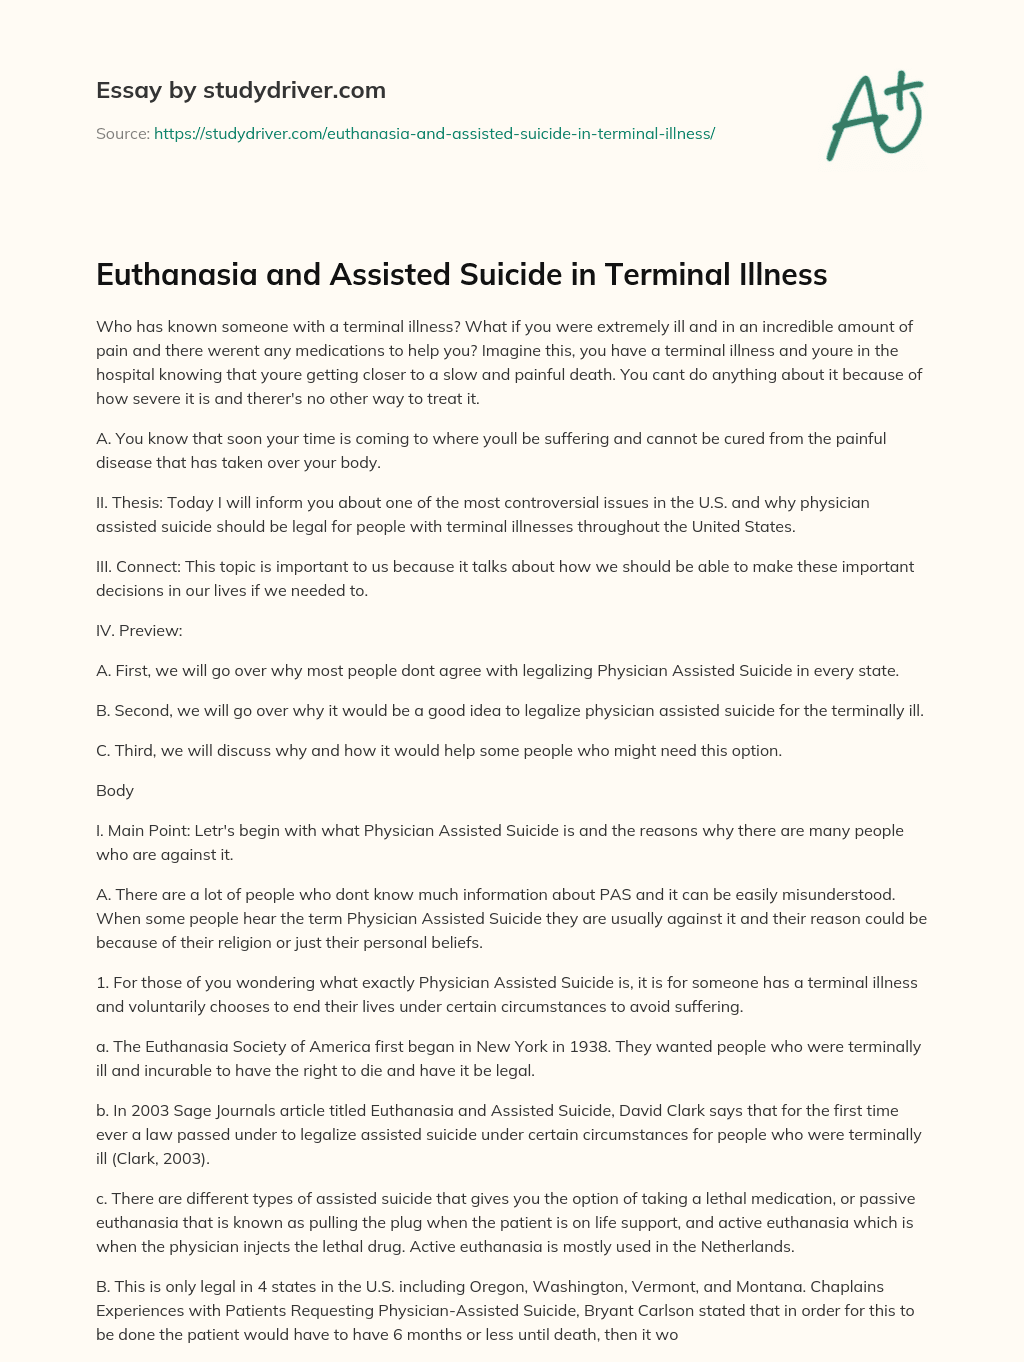 Euthanasia and Assisted Suicide in Terminal Illness essay